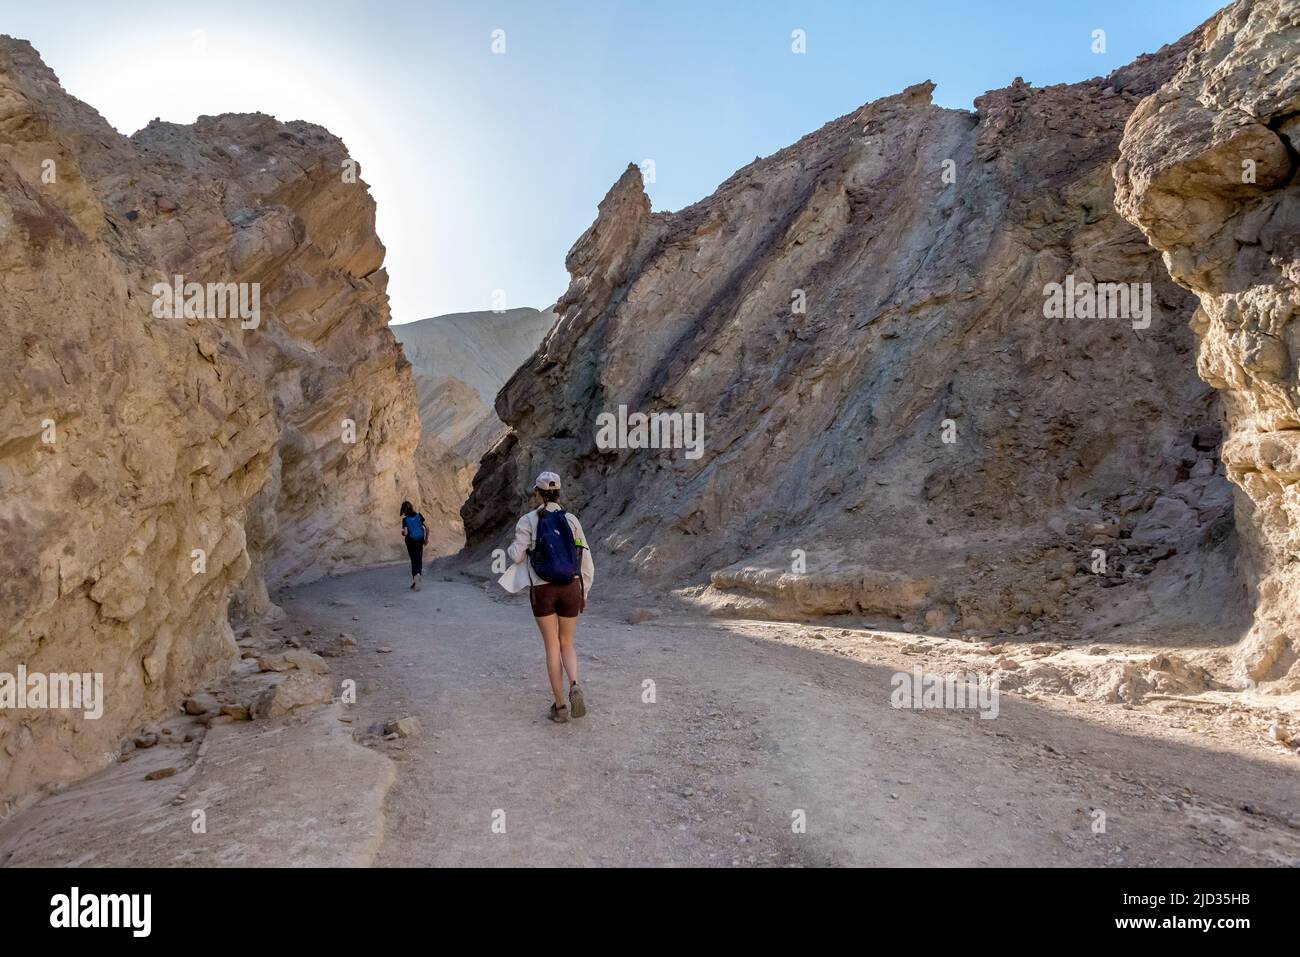 Hikers in Golden Canyon, walking between displaced sedimentary canyon walls in Death Valley National Park. Stock Photo